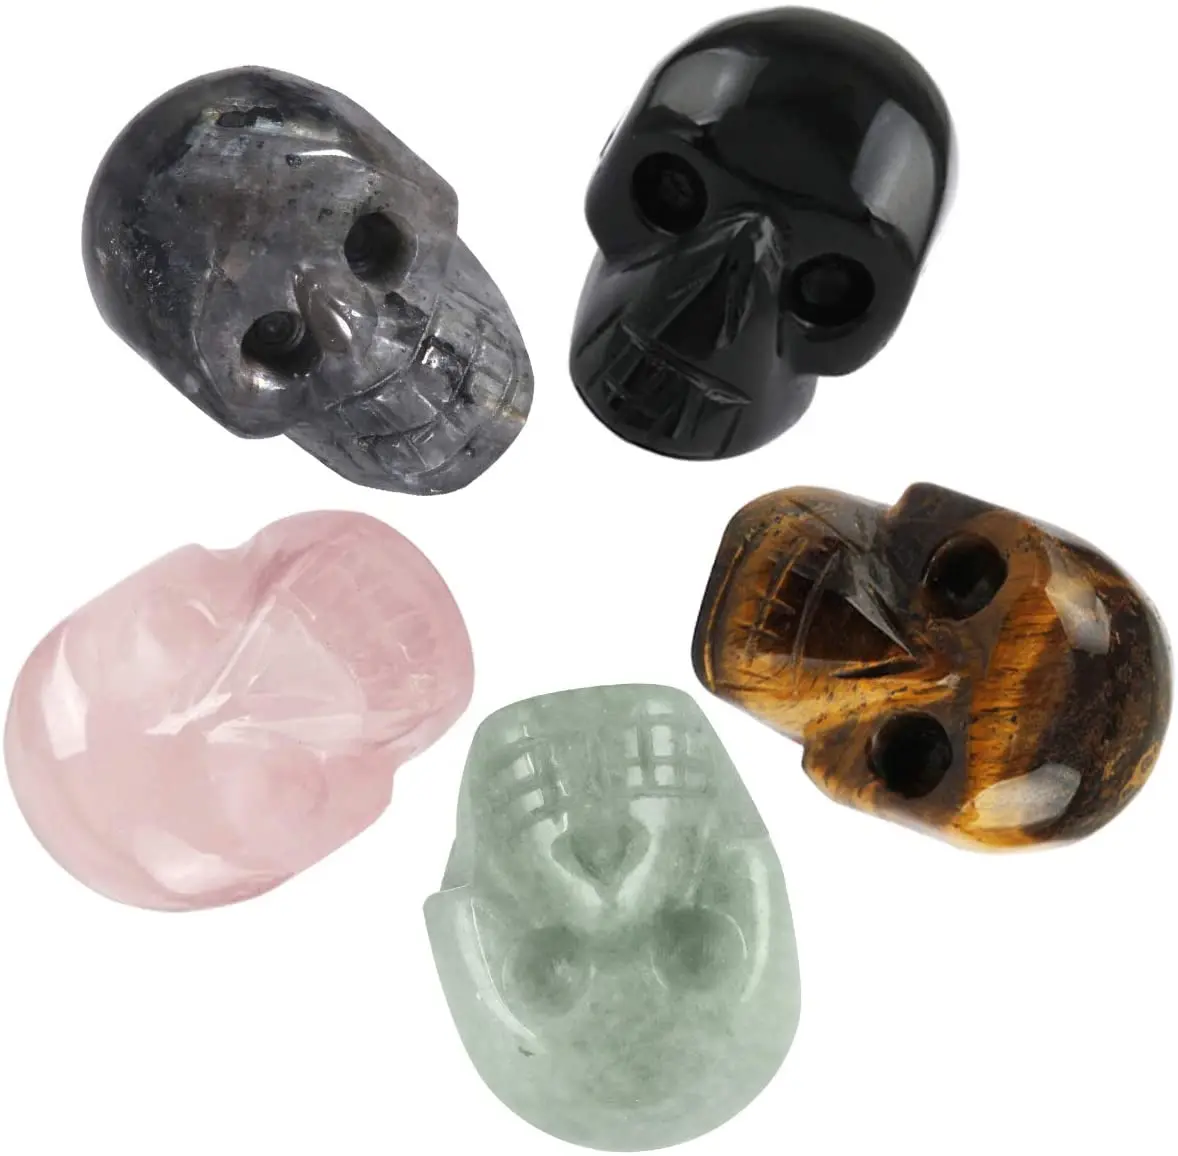 

1 Inch Assorted Crystal Skull Sculpture Hand Carved Gemstone Statue Figurine Collectible Healing Reiki Home Decoration